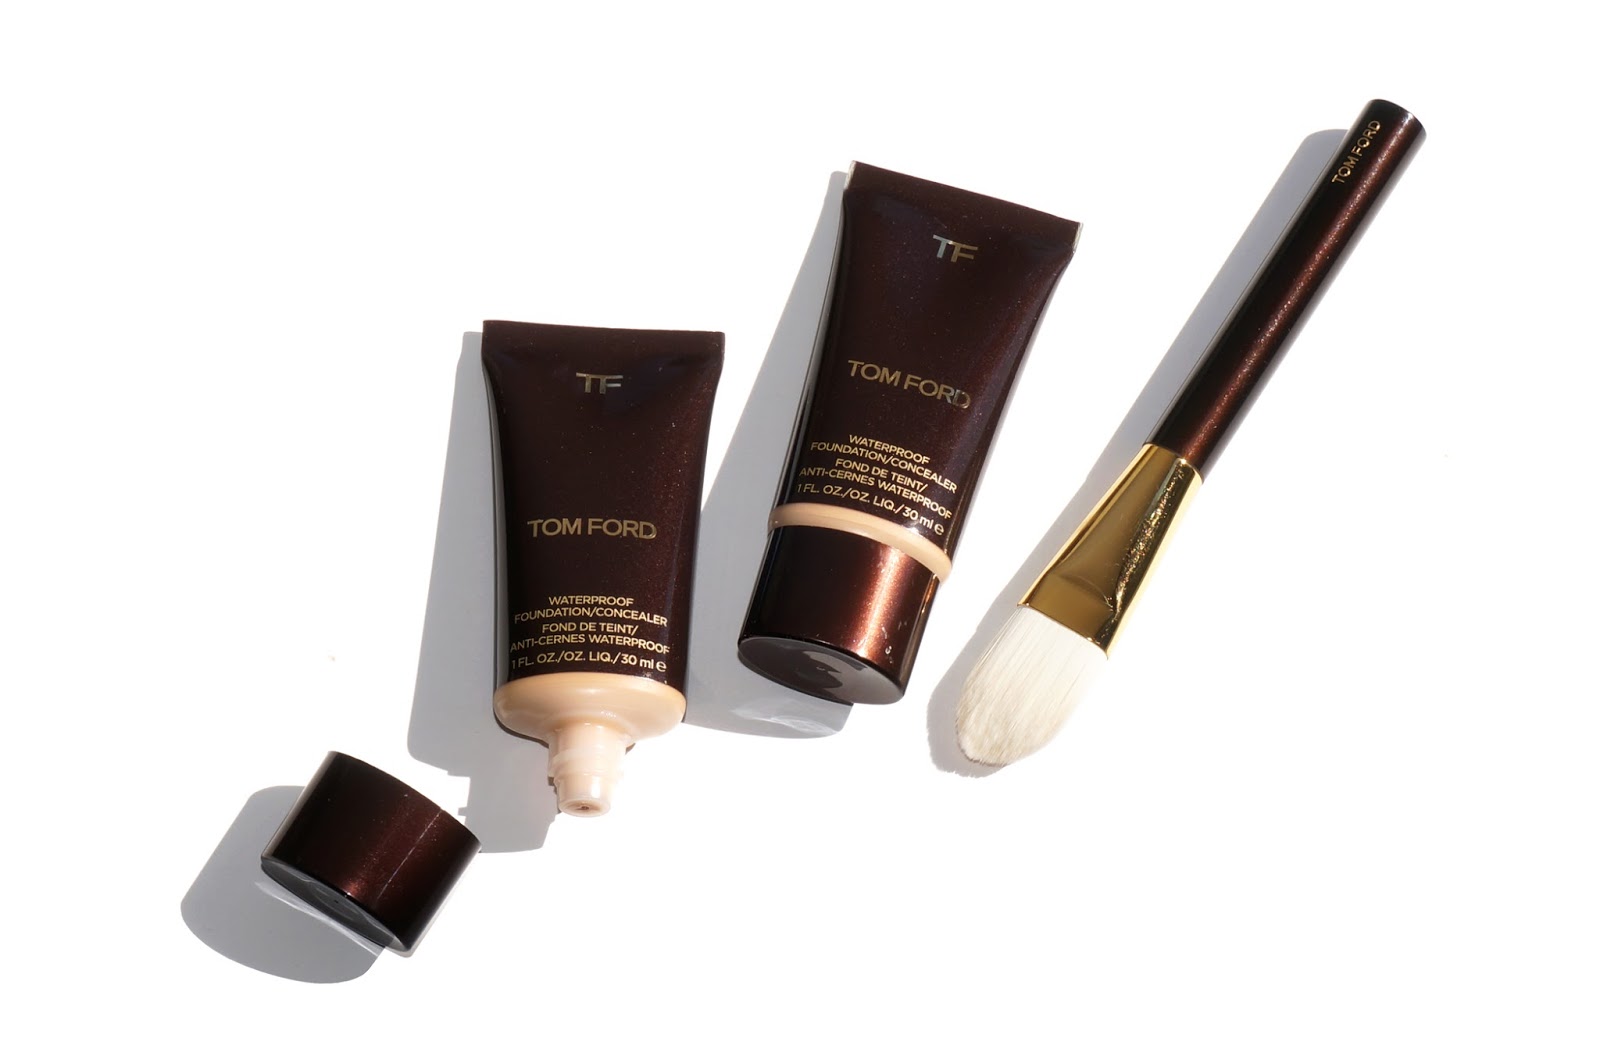 The Beauty Look Book - Tom Ford Waterproof Foundation Concealer Review